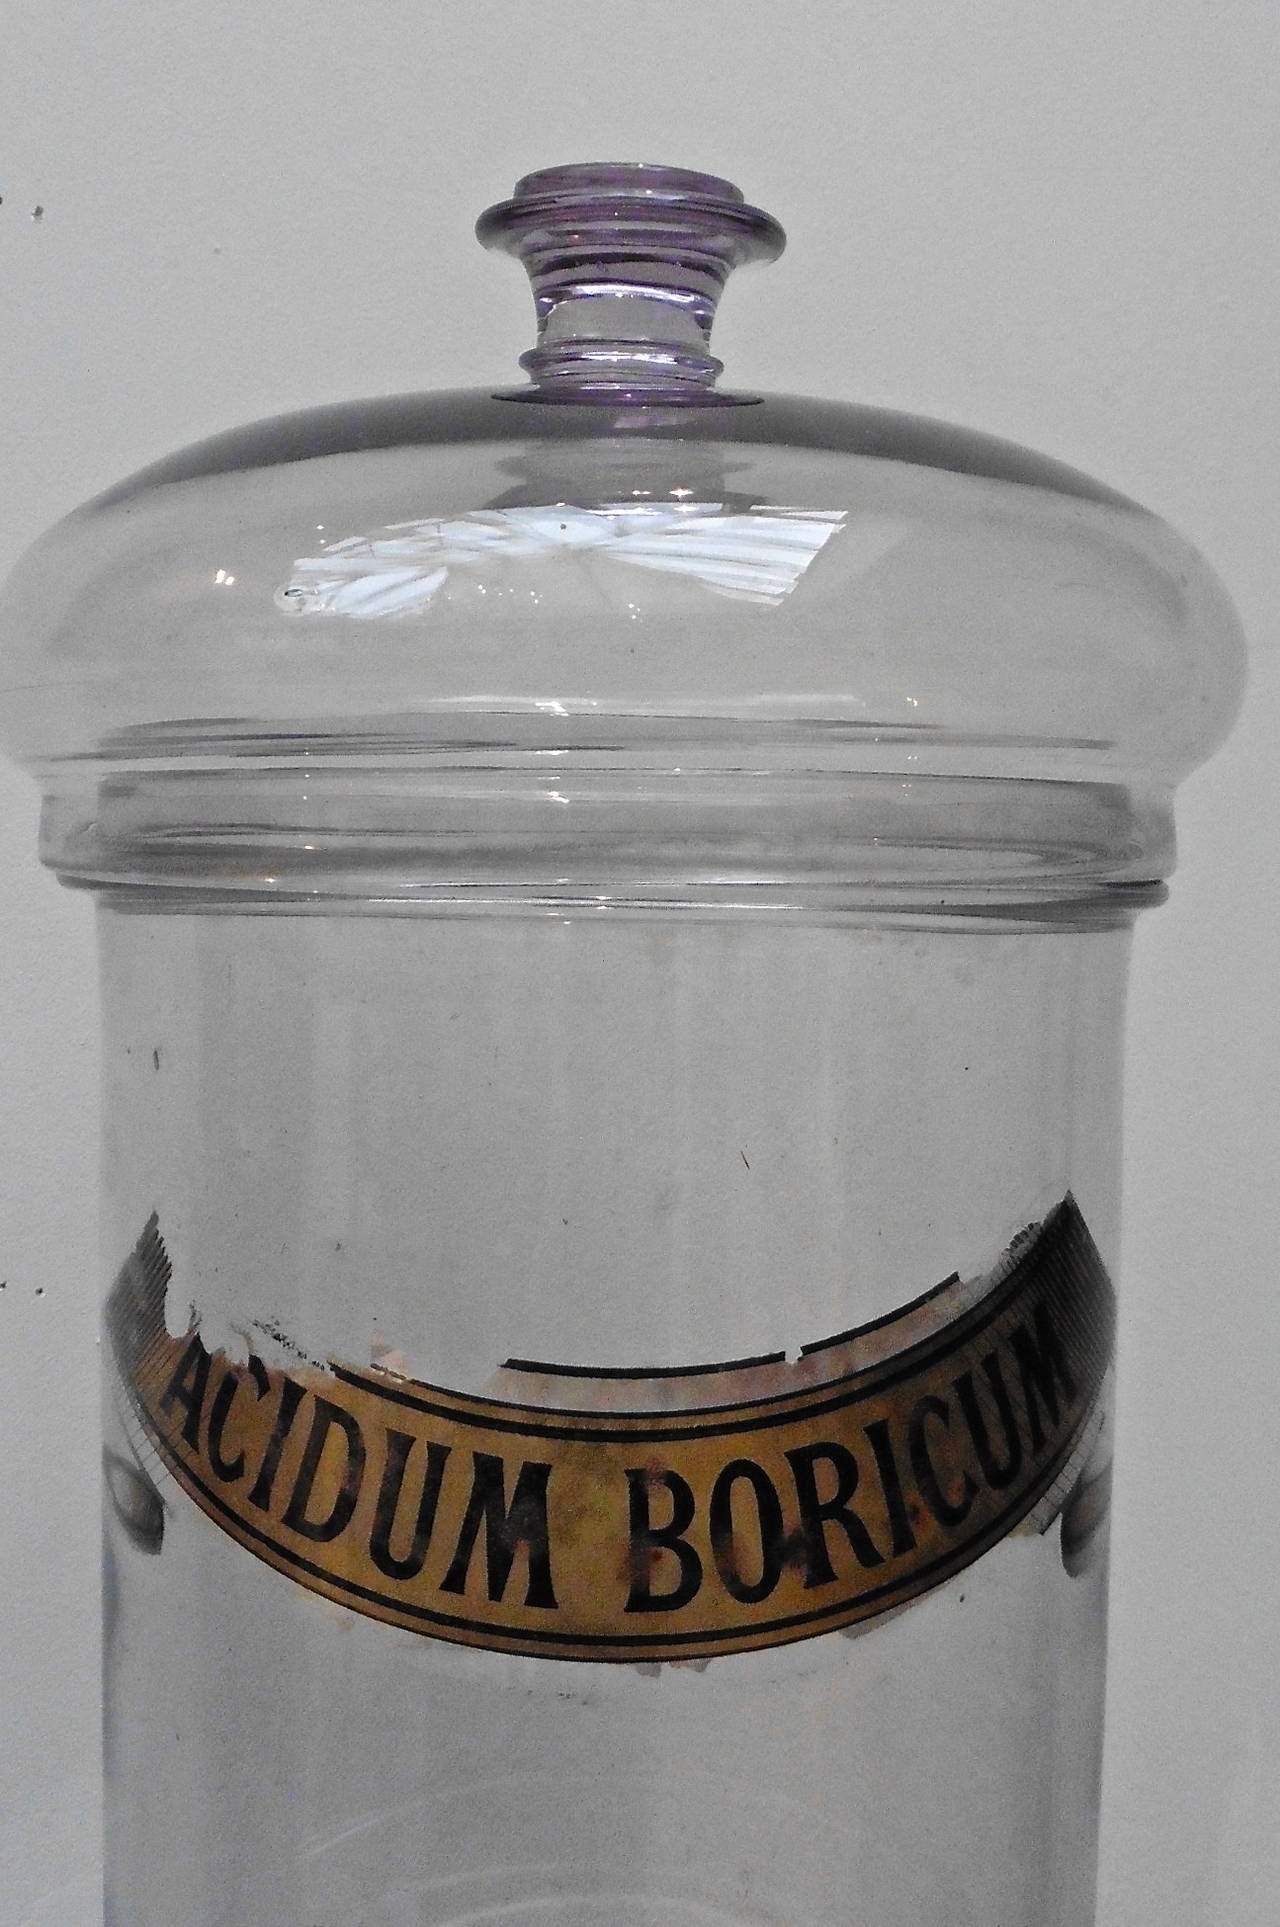 A wonderful pair of large French lavender tinted glass pharmacy jars and covers with original paper labels; one labeled 'Acidum Boricum,' the other 'Nux Vomica' circa 1860.